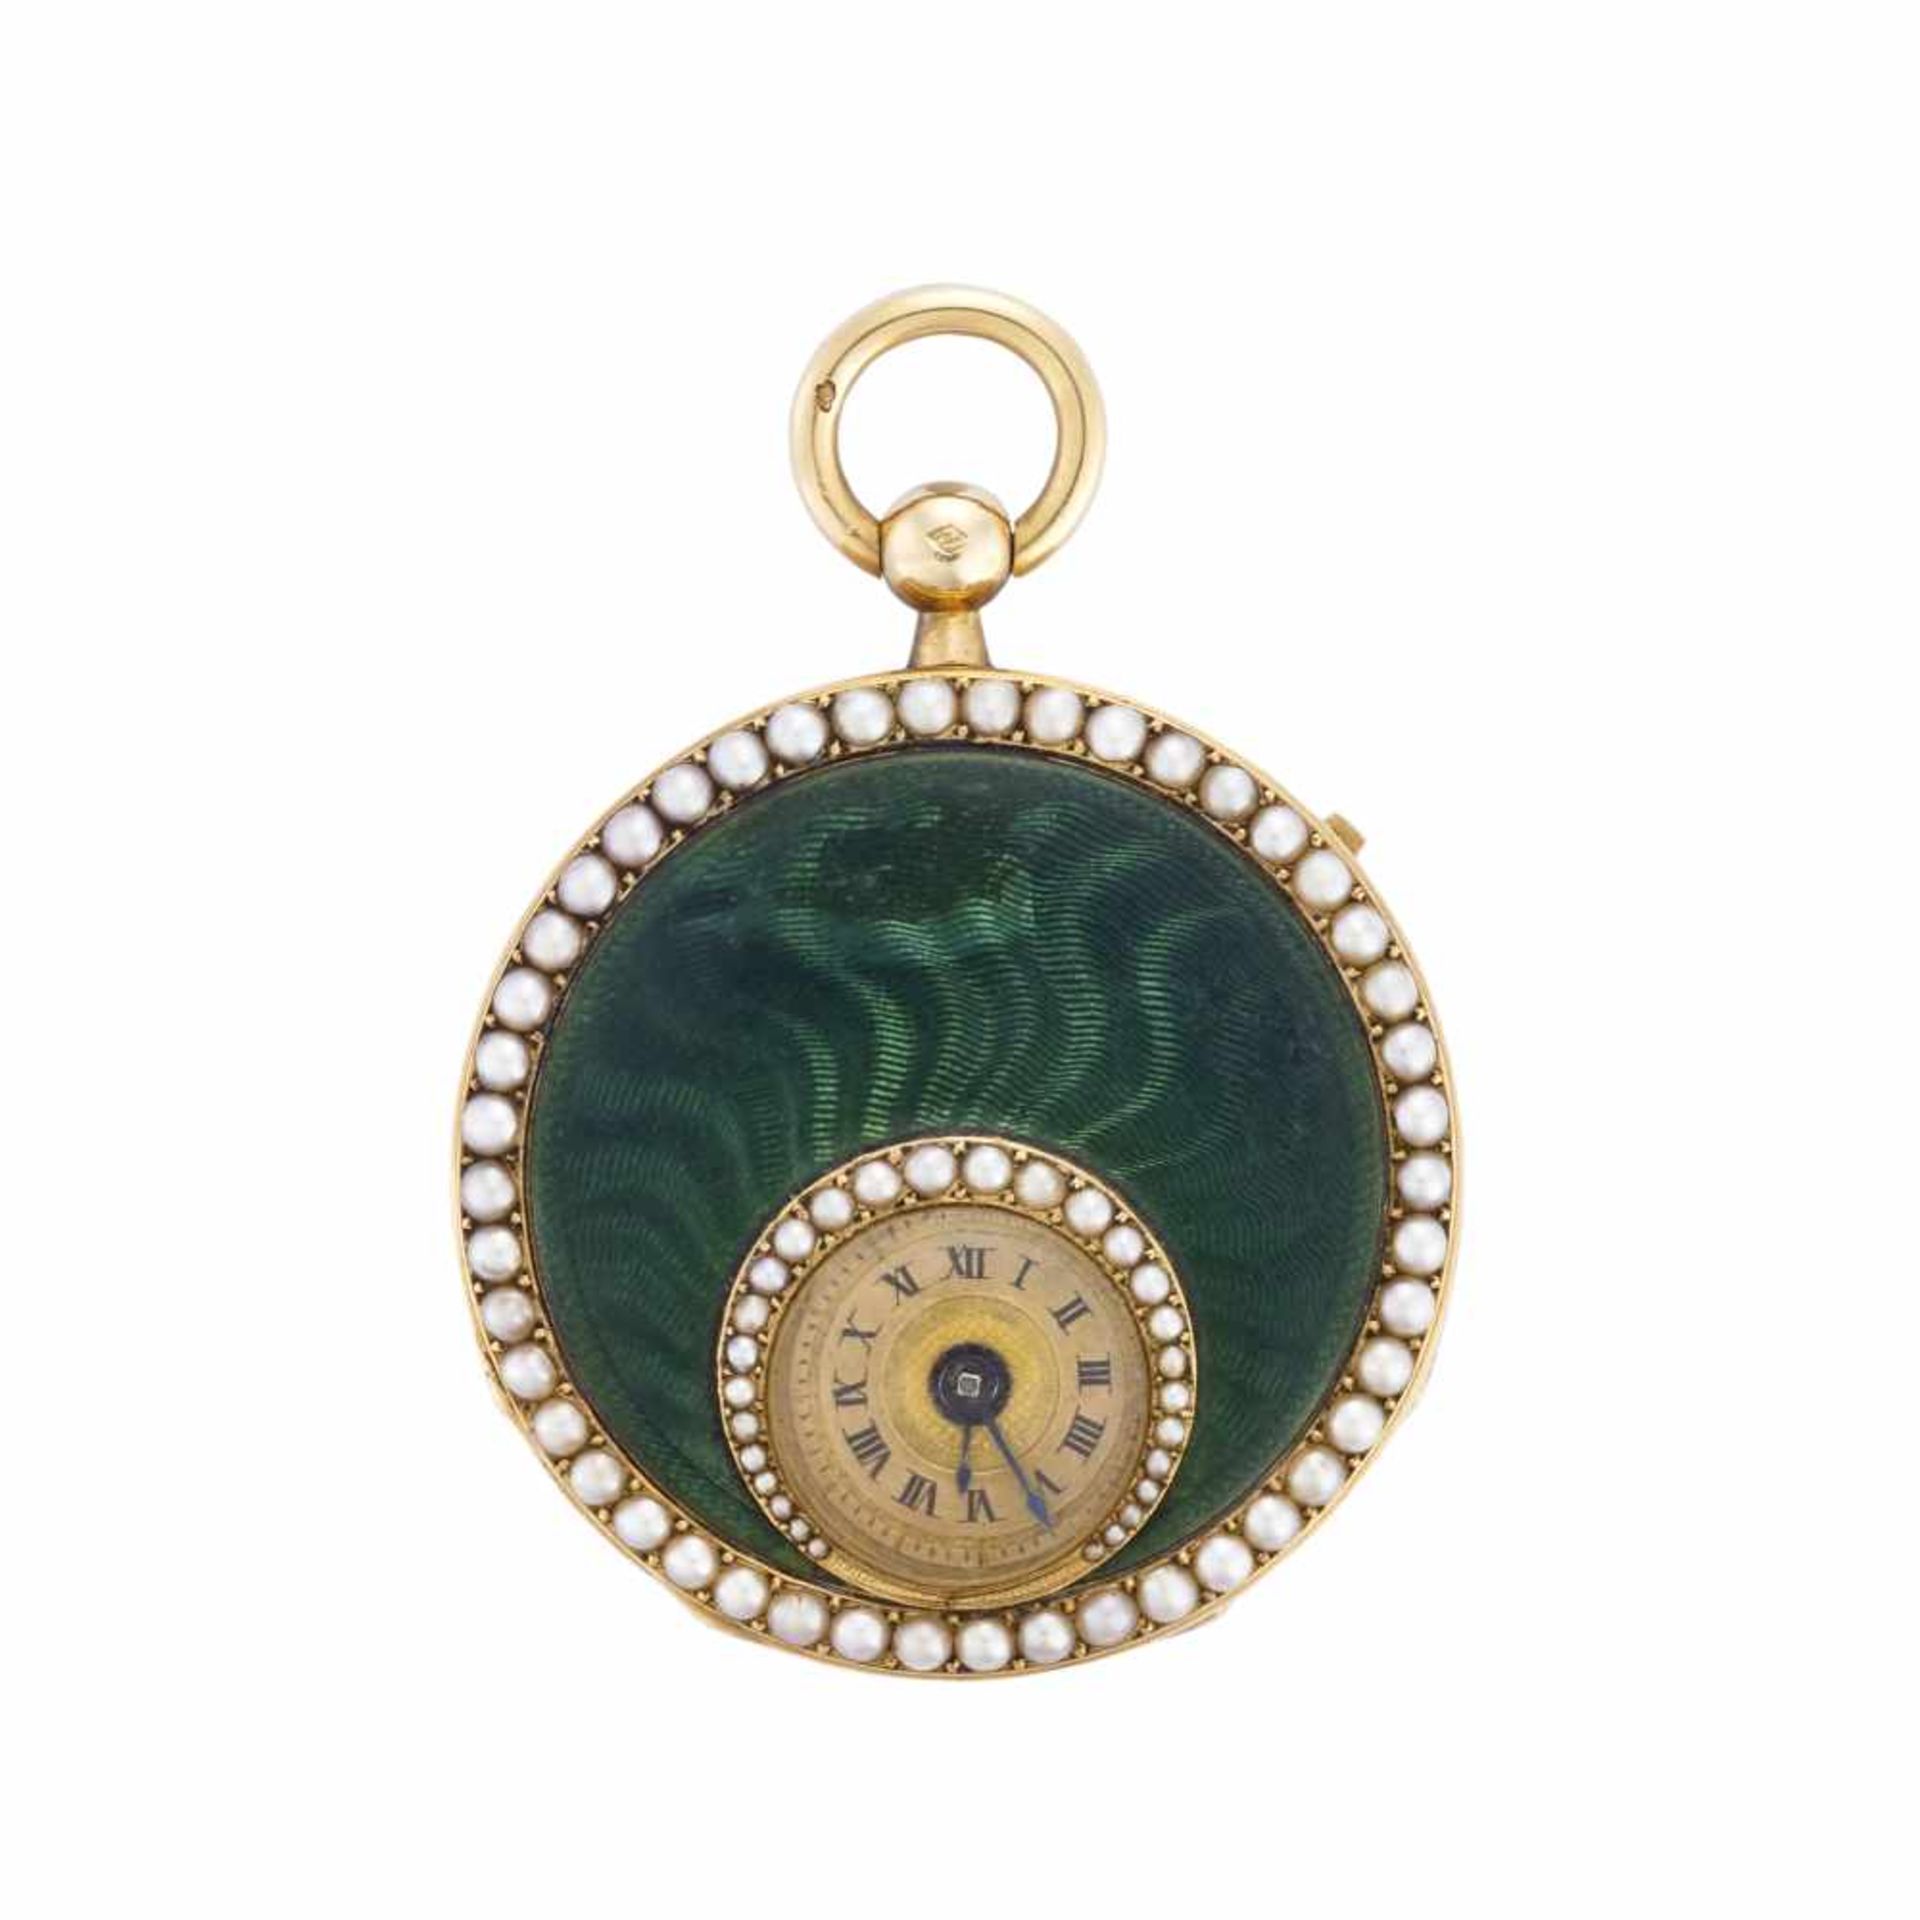 ANONYMOUS18K gold pocket watch white green enamel and pearlsEarly 19th centuryKey-wind